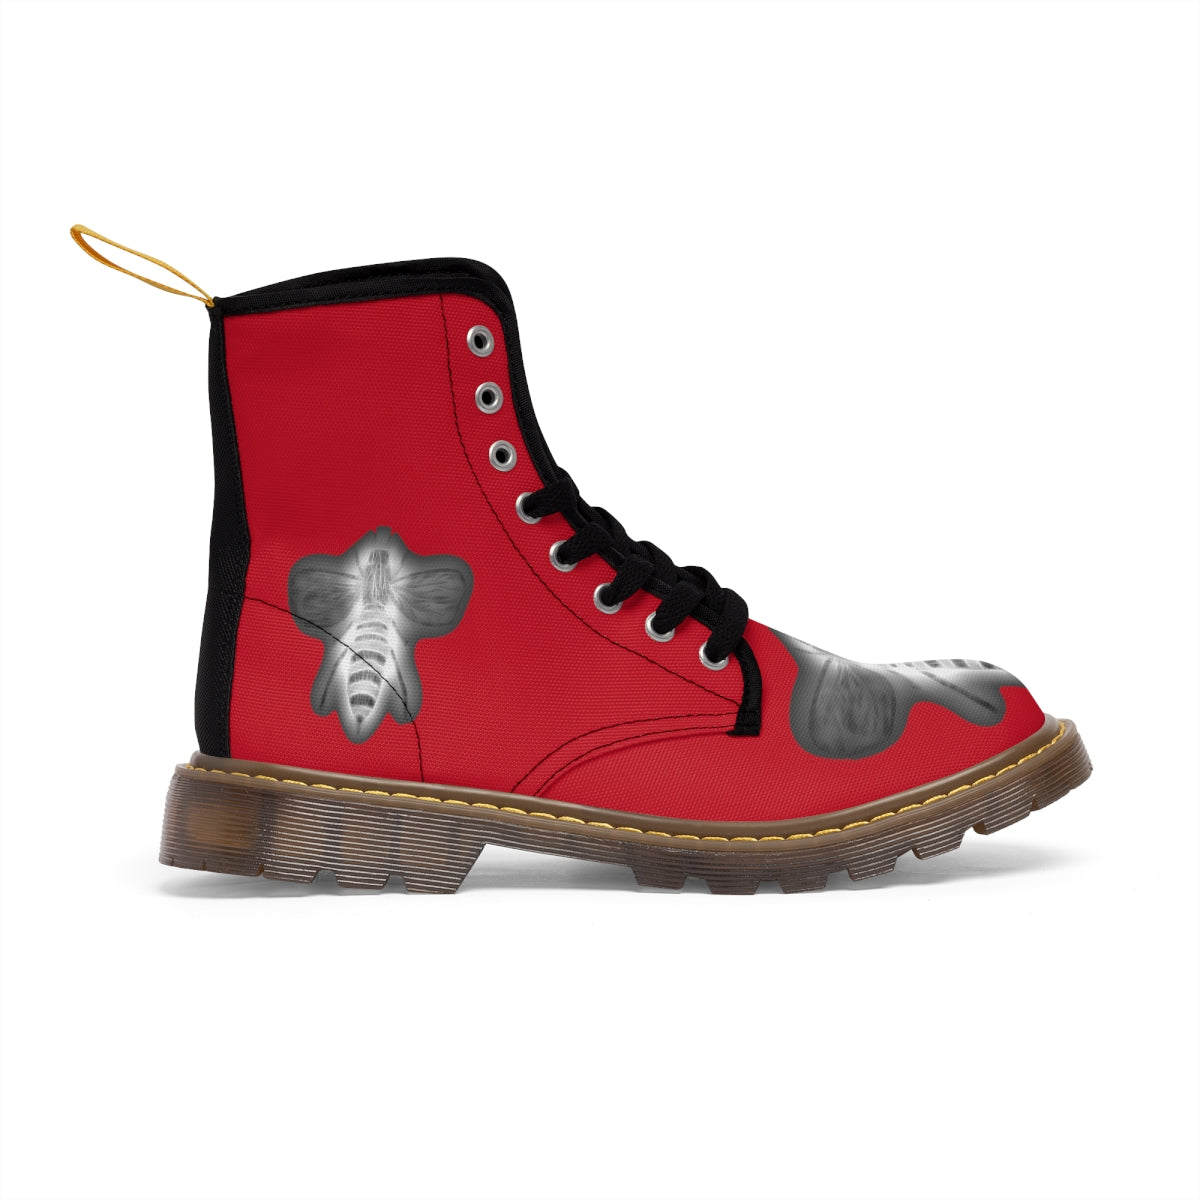 Negative Bee Men's Red Canvas Boots Shoes Bee boots combat boots fun mens boots Mens boots mens fashion boots Negative Bee red mens boots Shoes unique mens boots vegan boots vegan combat boots